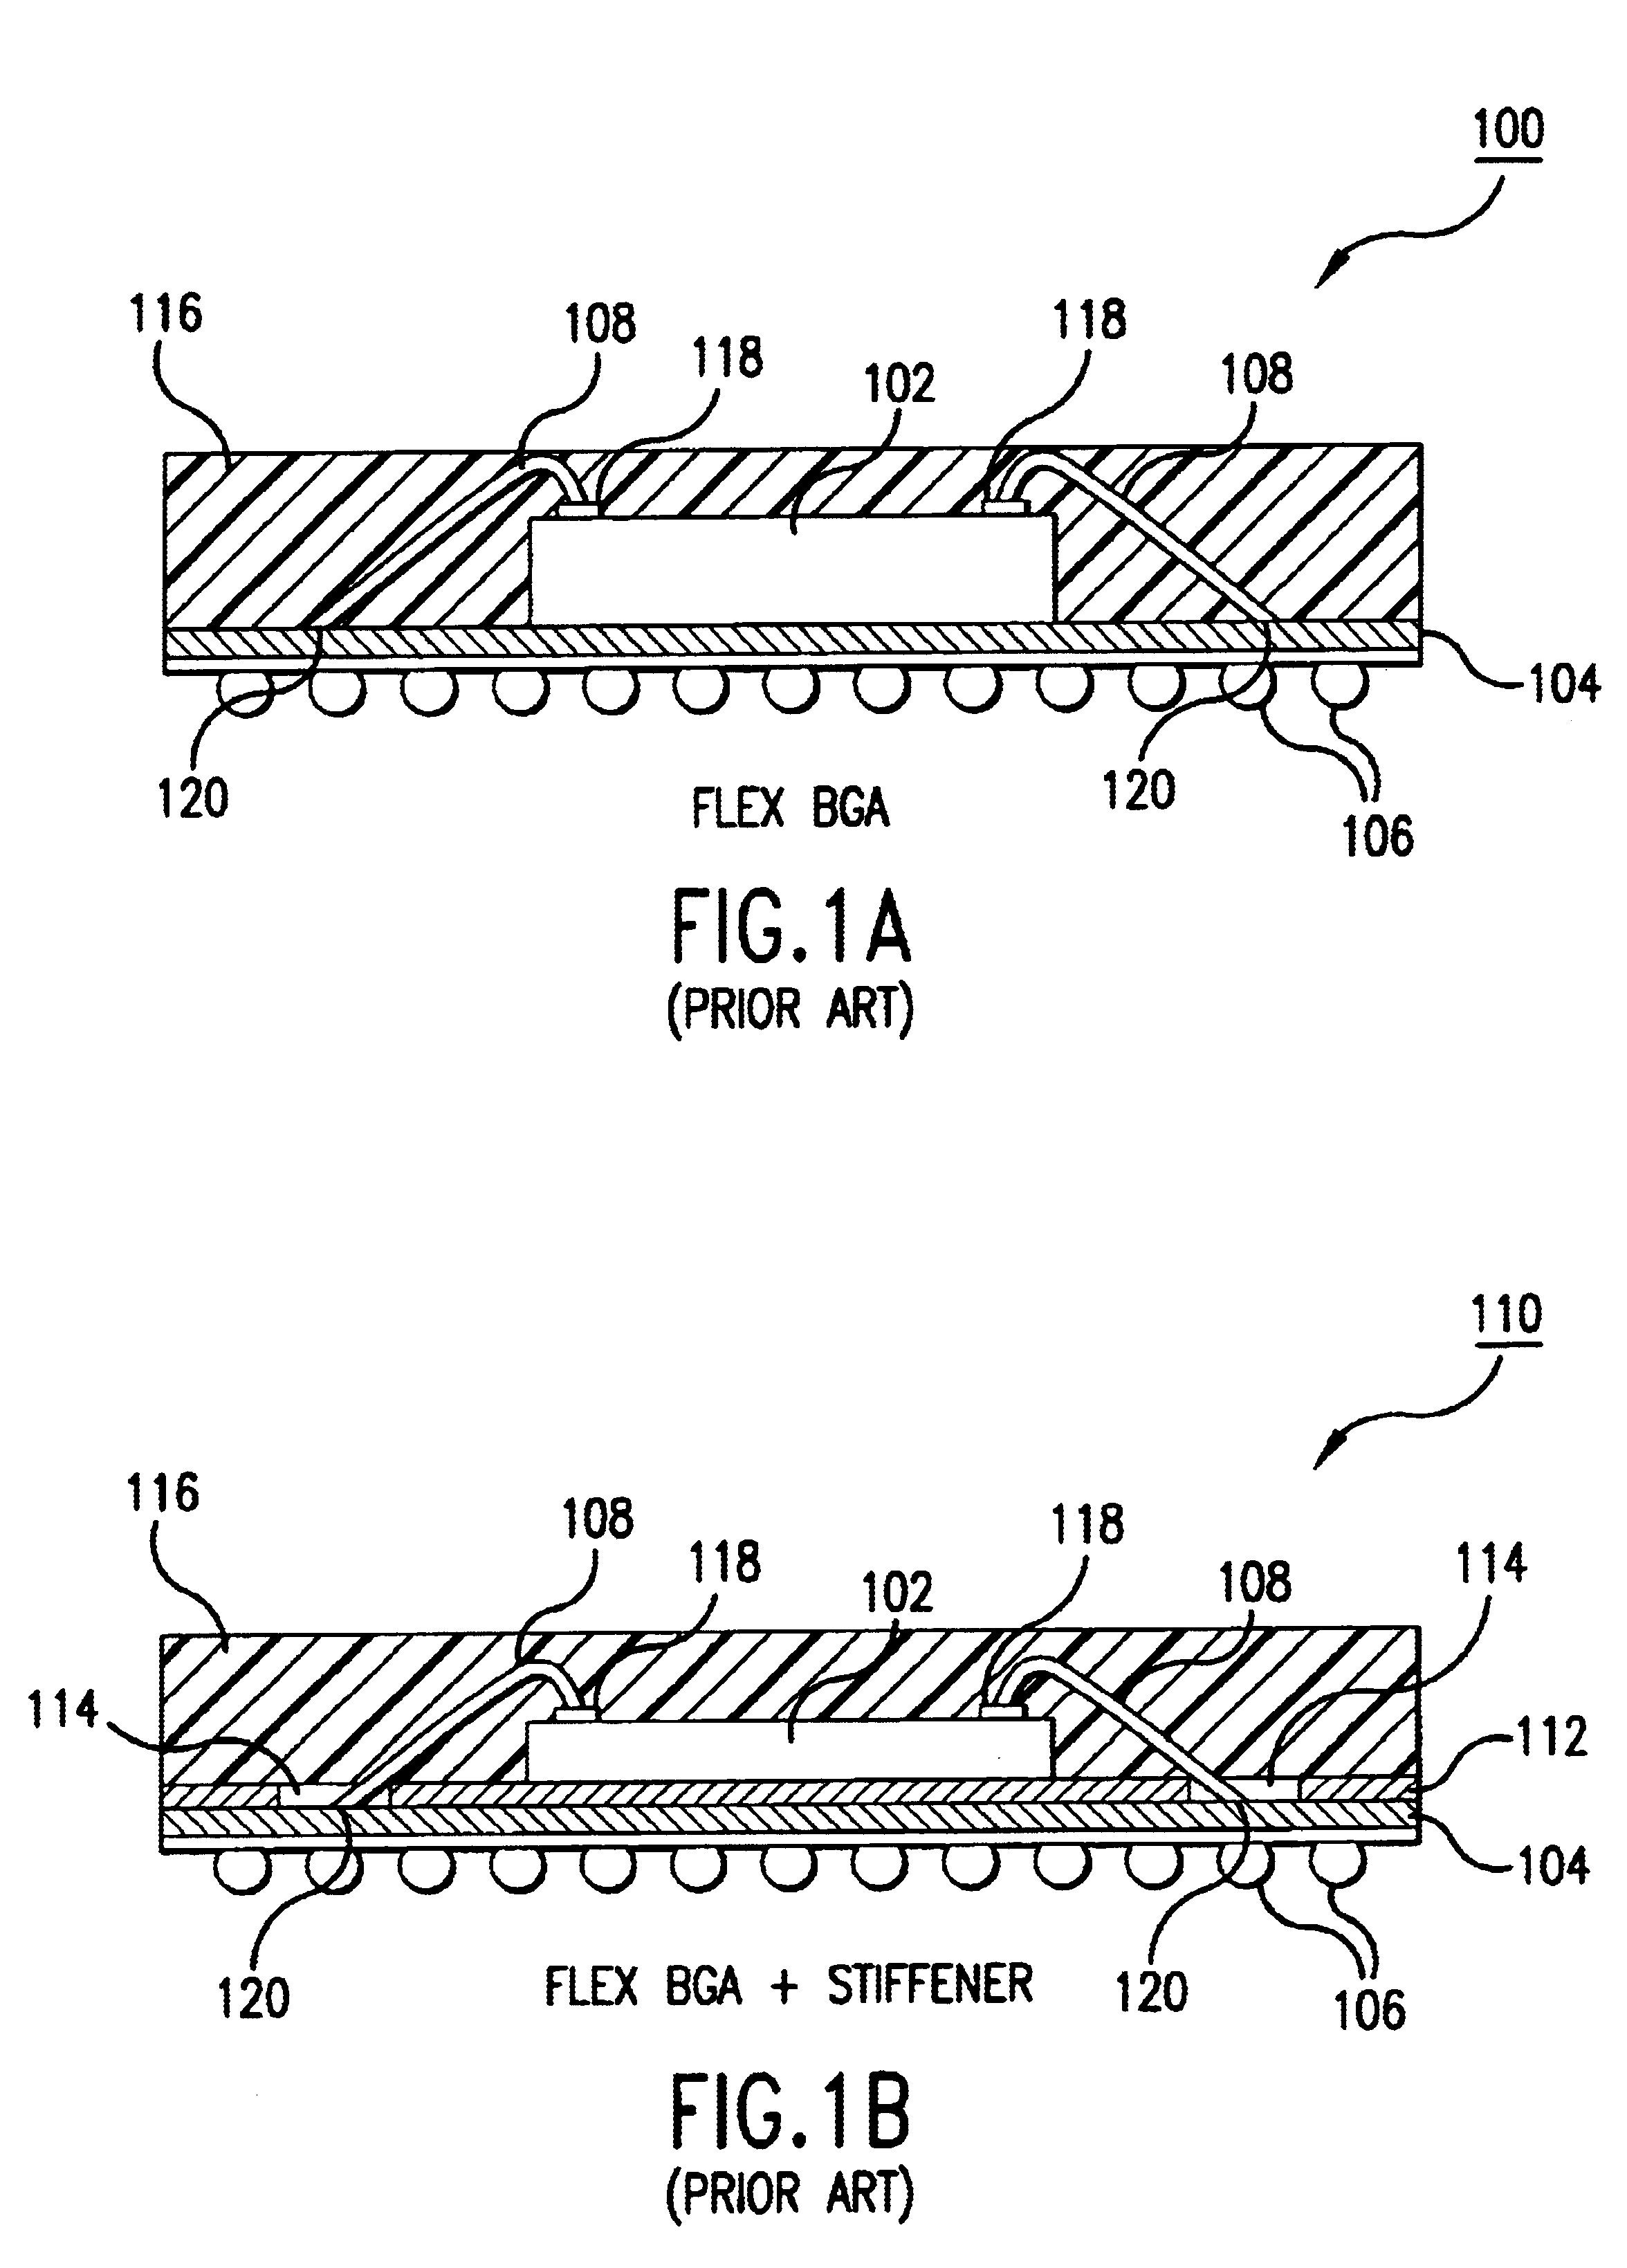 Ball grid array package with patterned stiffener layer